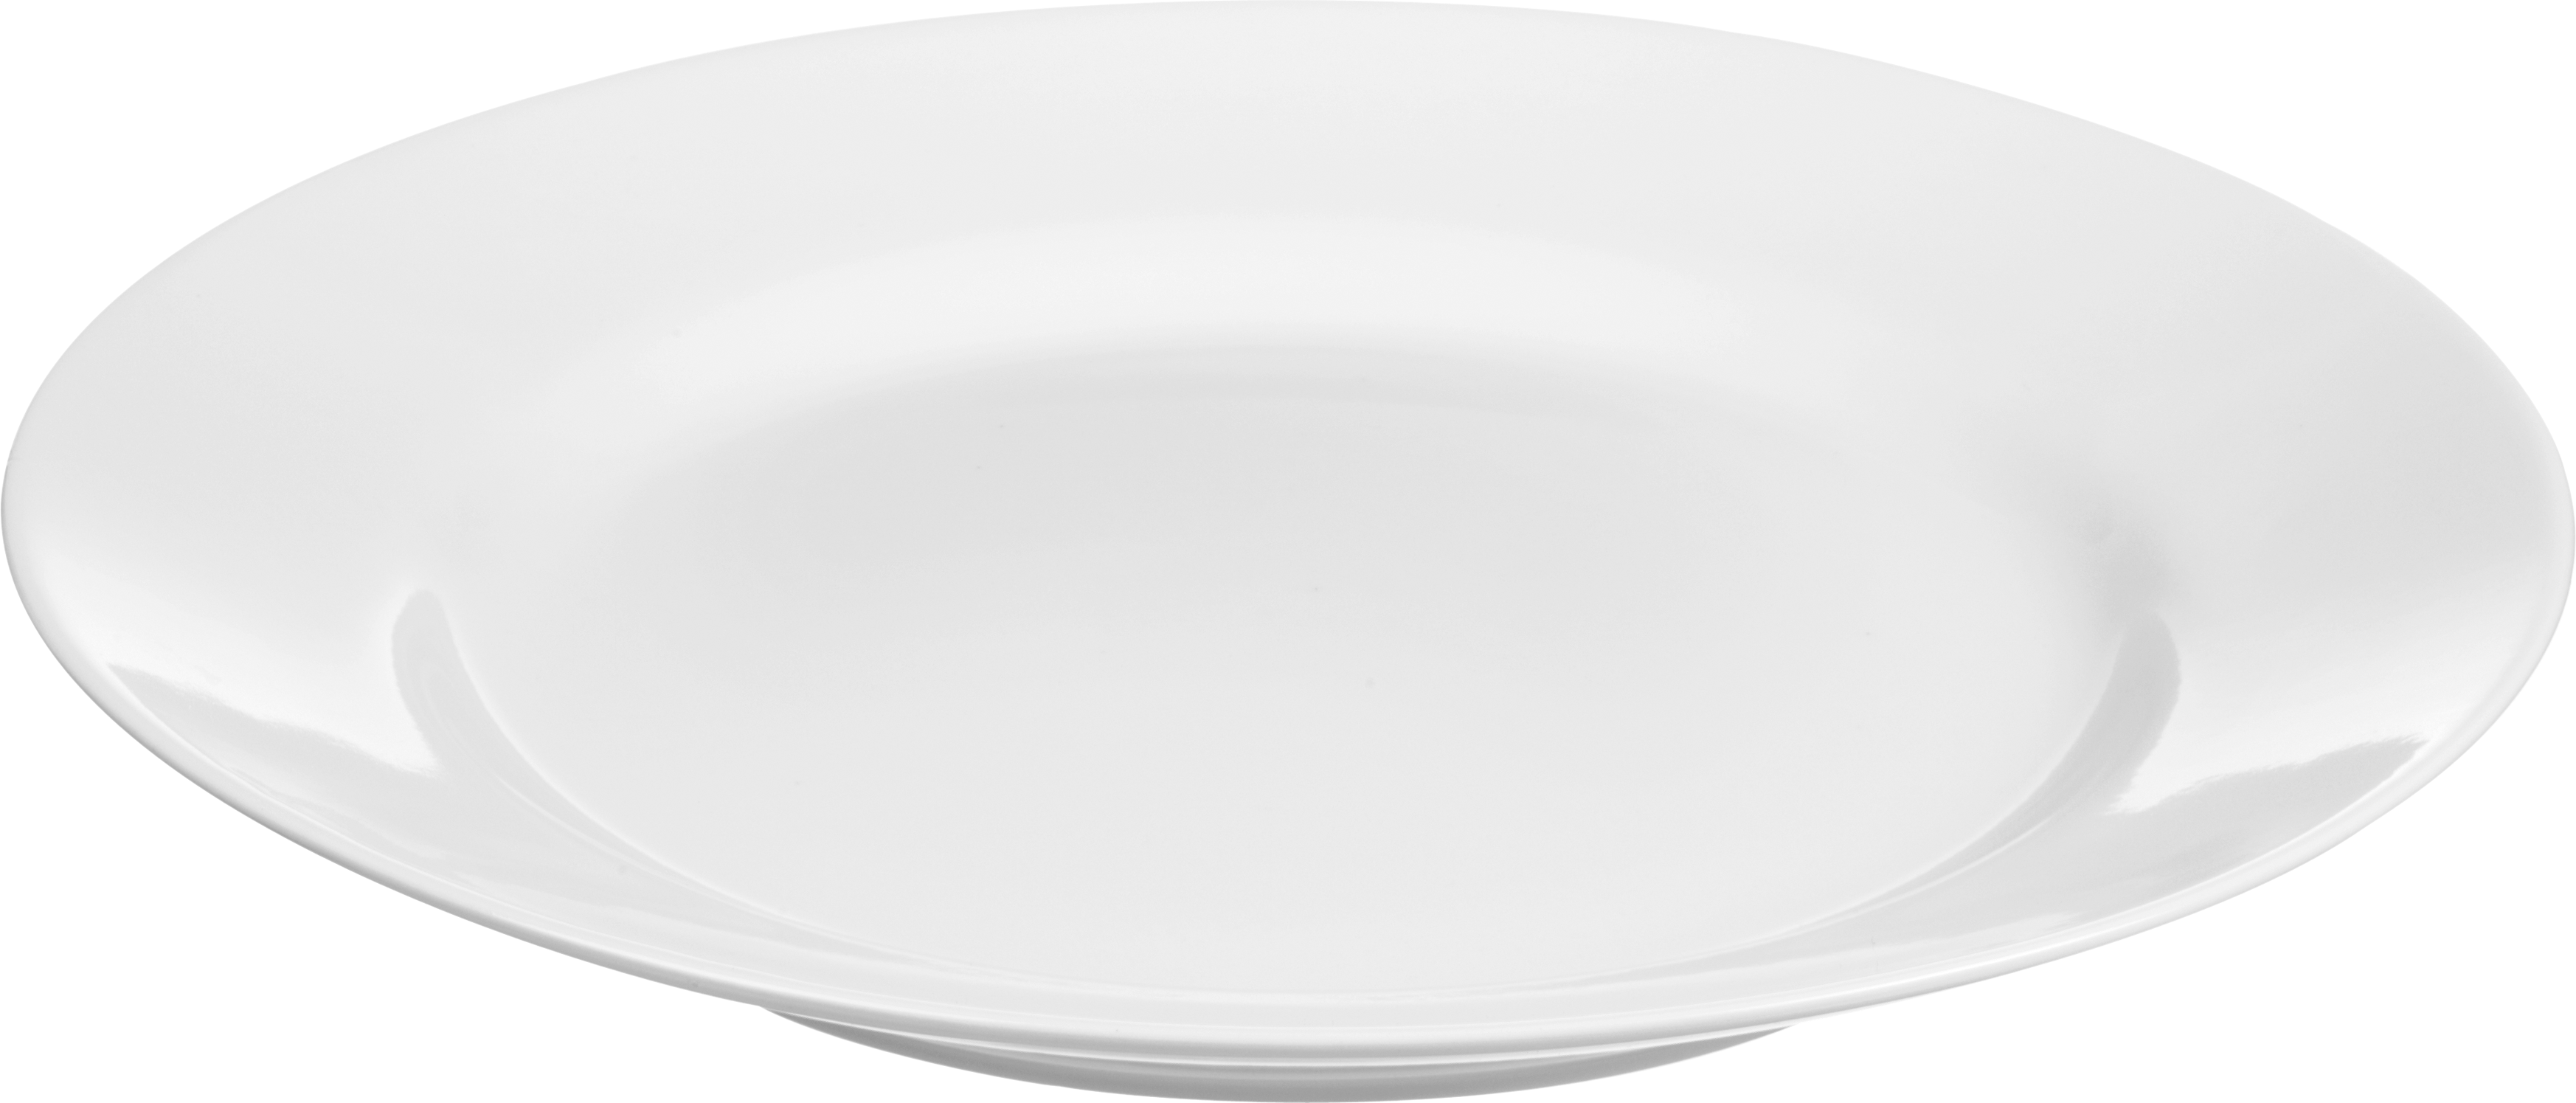 Plate six isolated stock. Dish clipart dish china